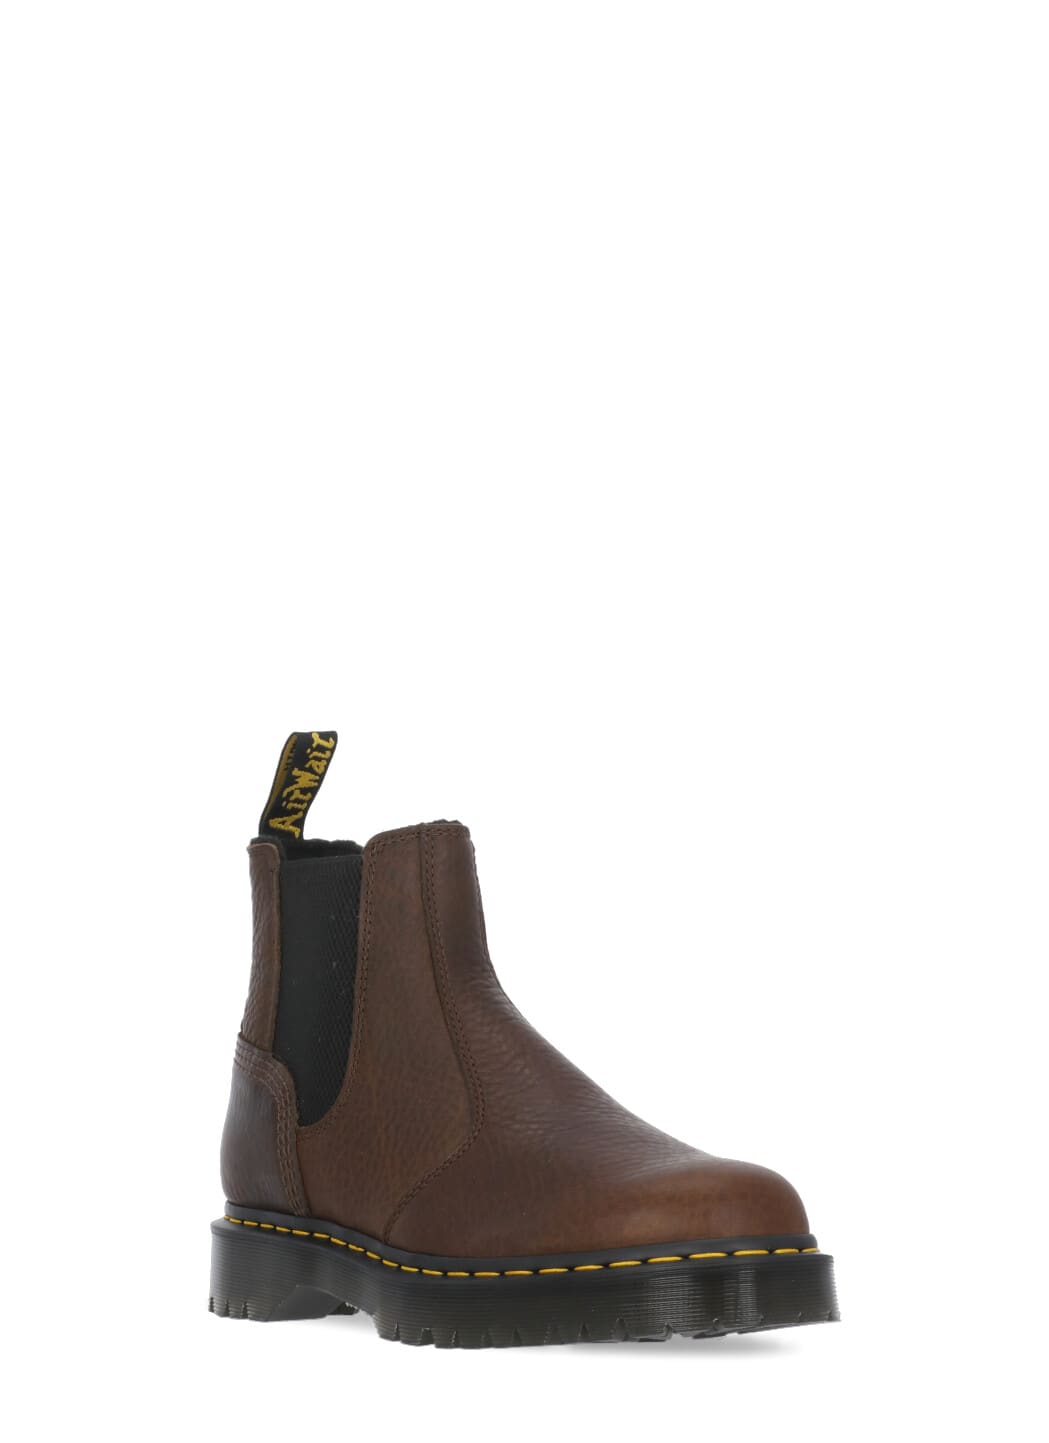 Dr. Martens 2976 Bex Boots In Brown | ModeSens